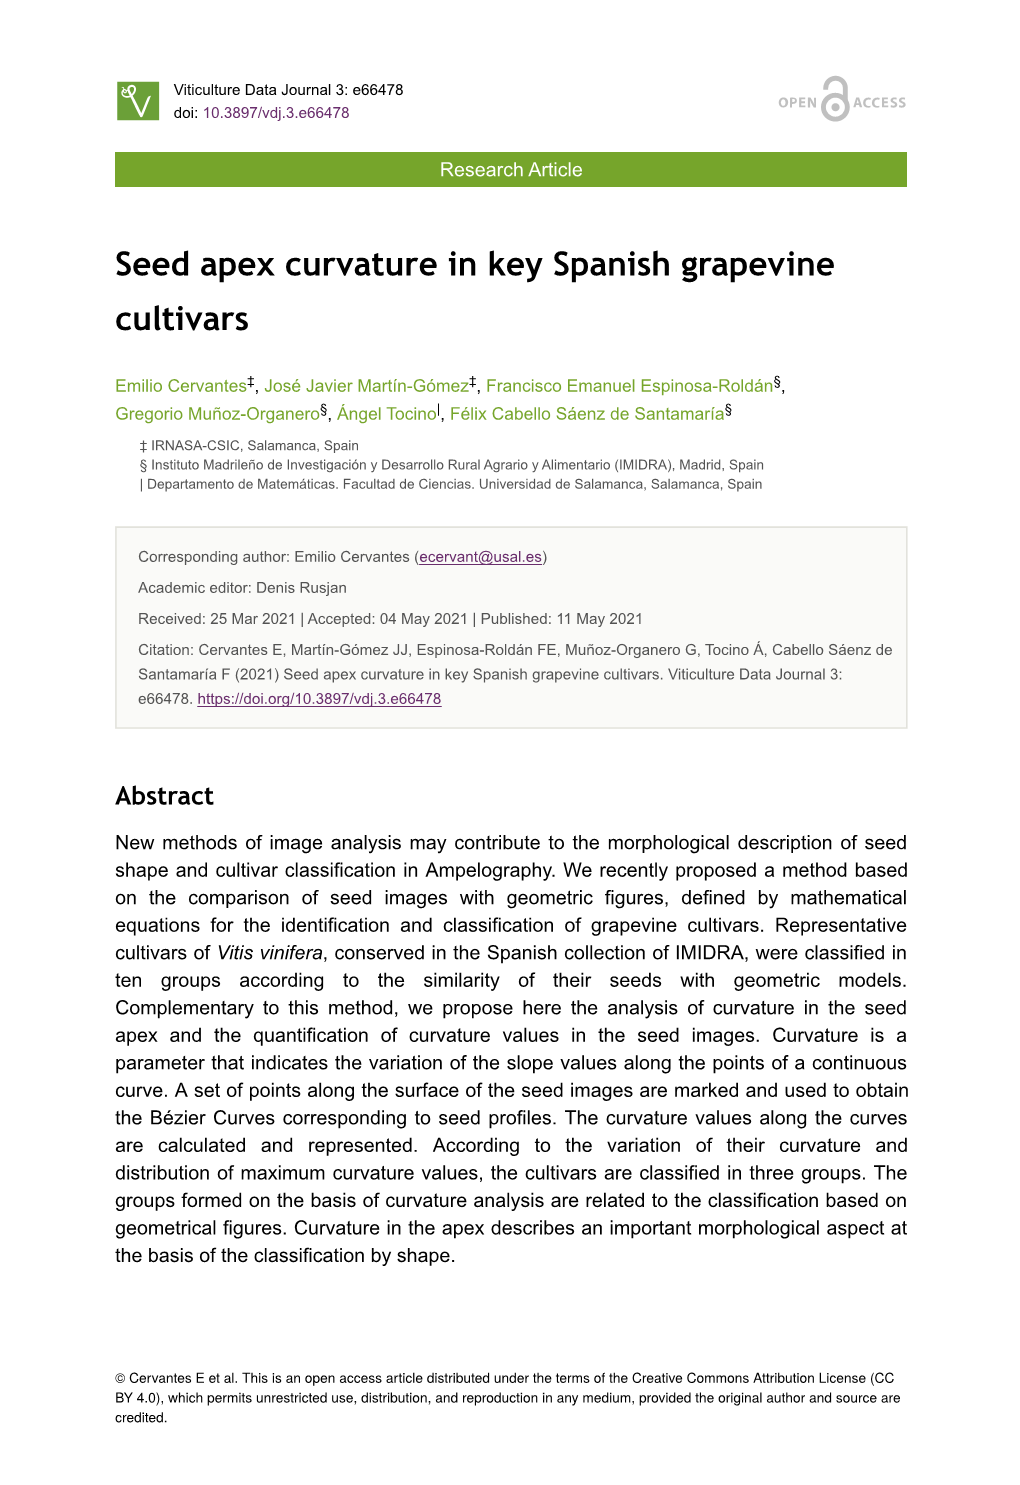 Seed Apex Curvature in Key Spanish Grapevine Cultivars